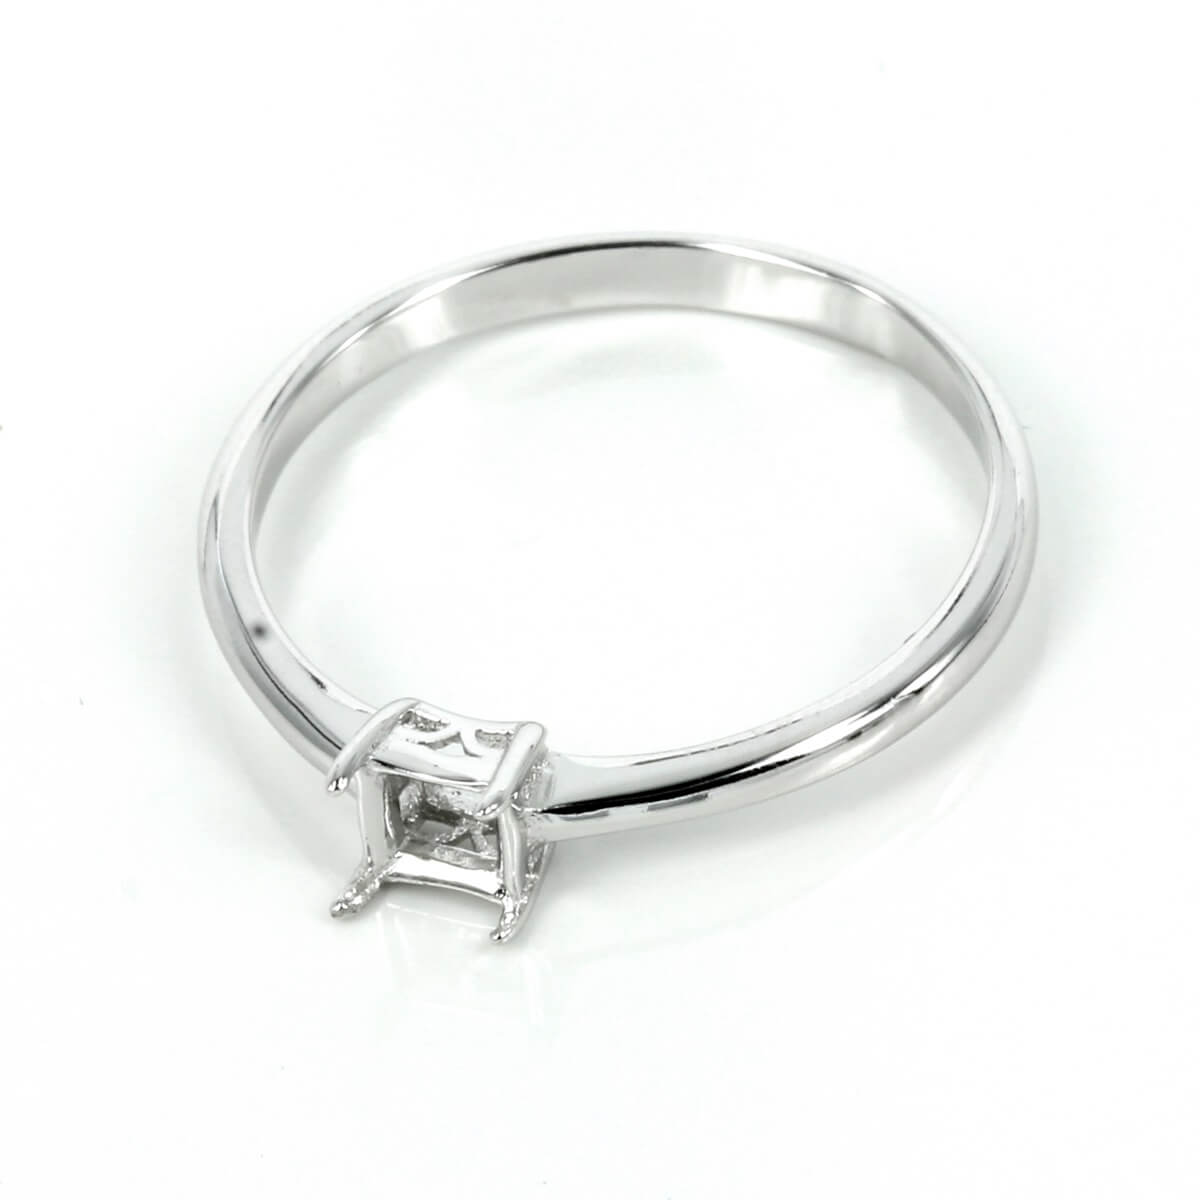 Square basket style ring with prong setting in sterling silver 4x4mm